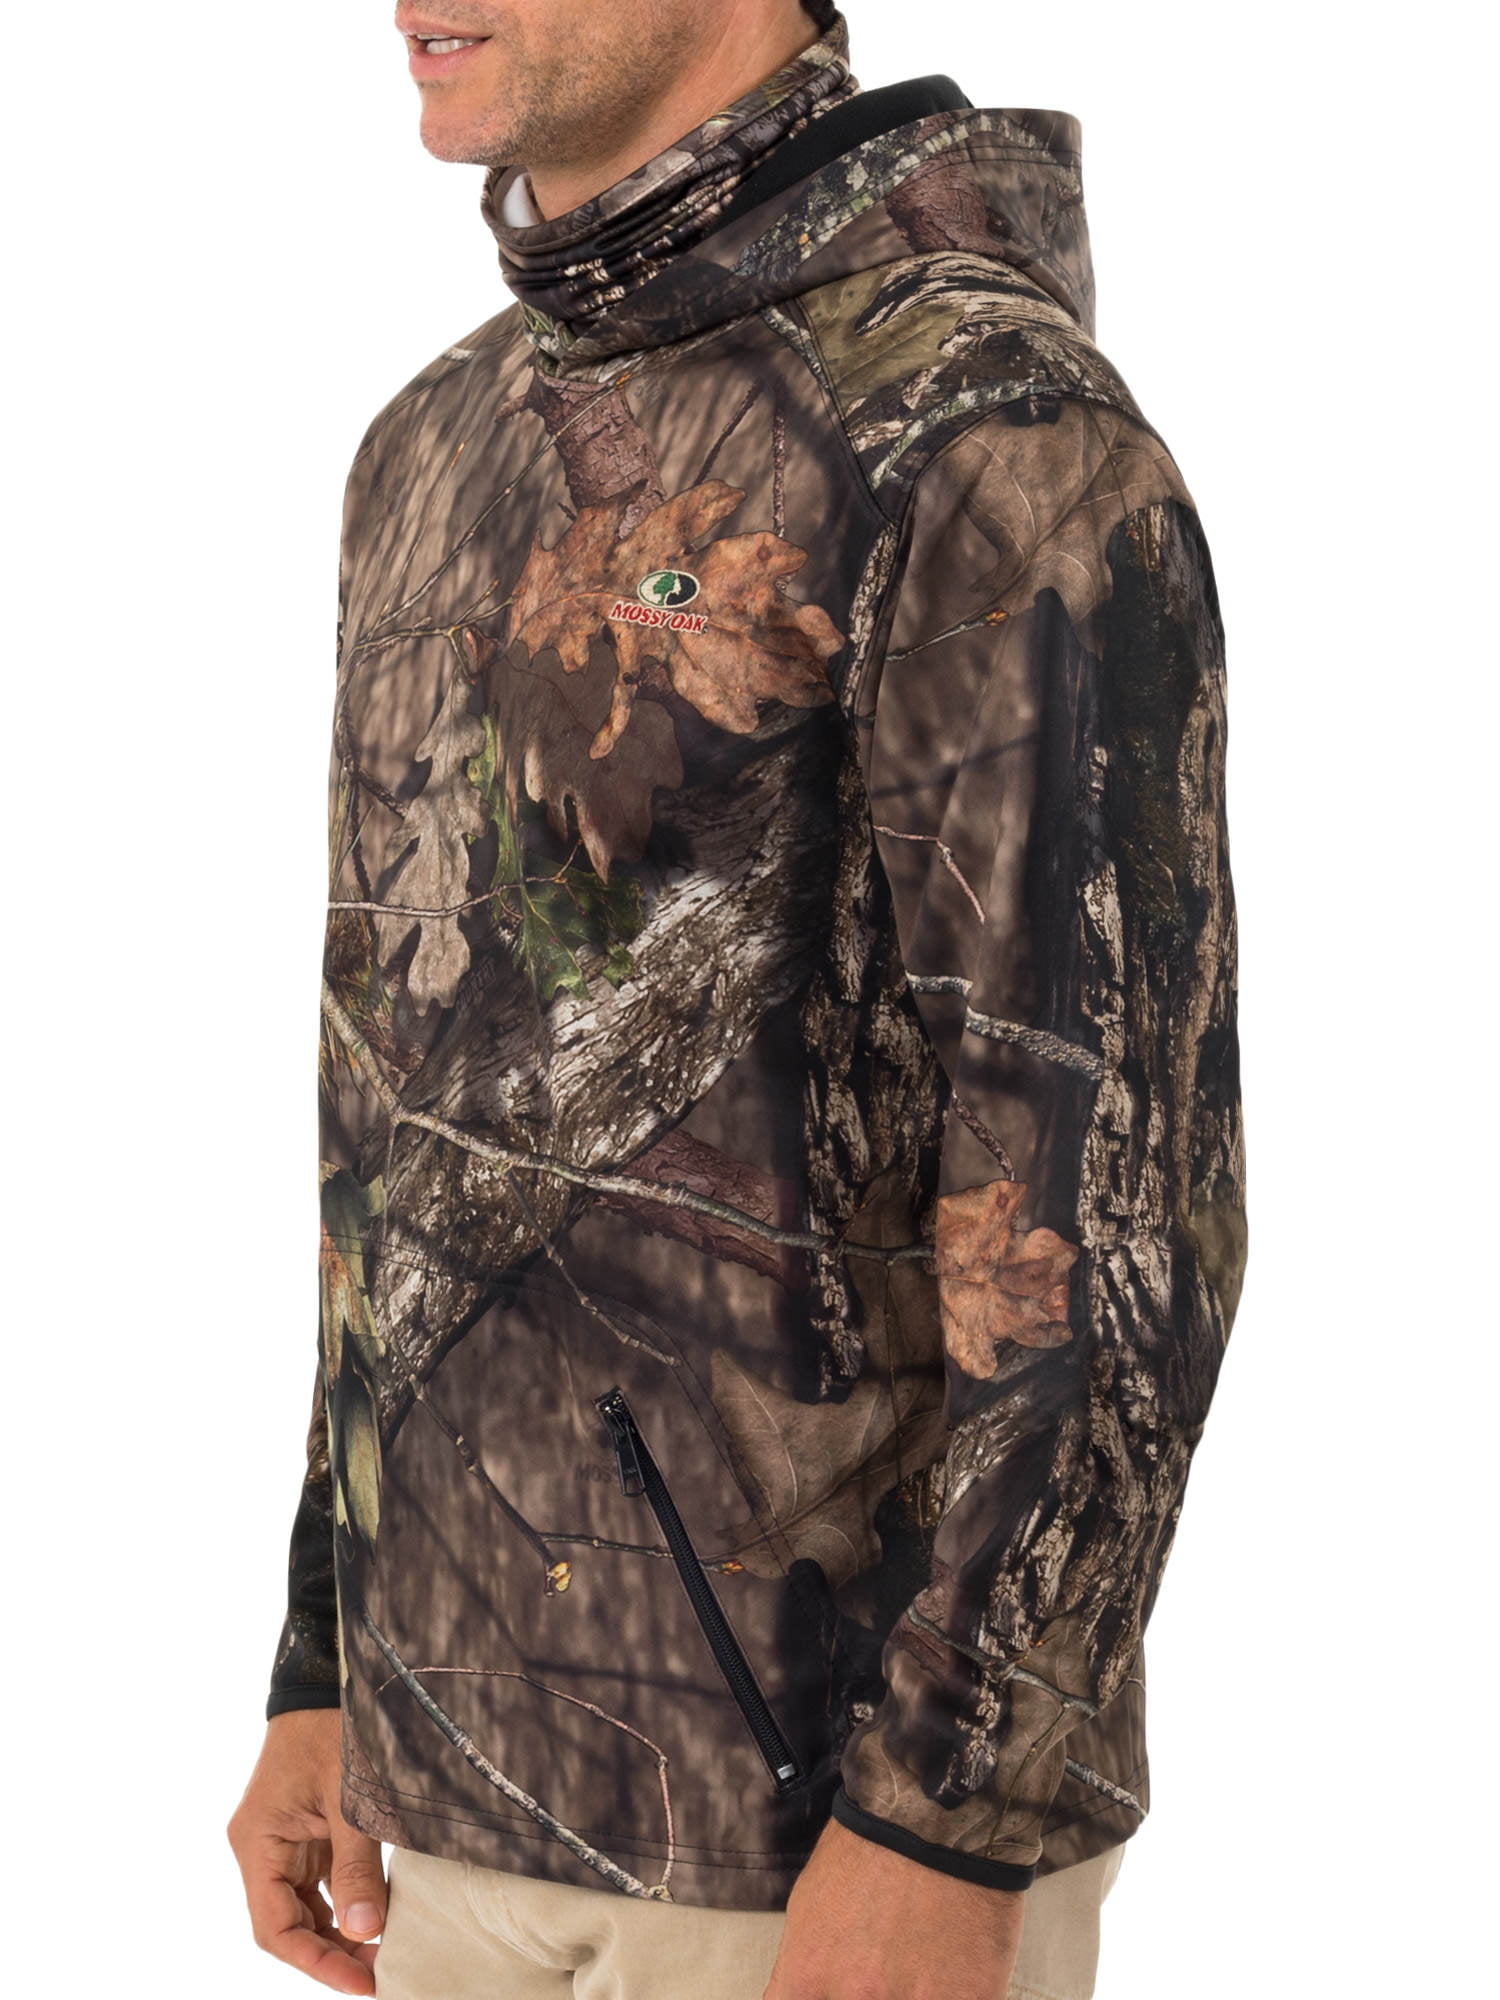 Men’s Mossy Oak or RealTree Performance Camo Hoodie w/ Built-In Face Gaiter